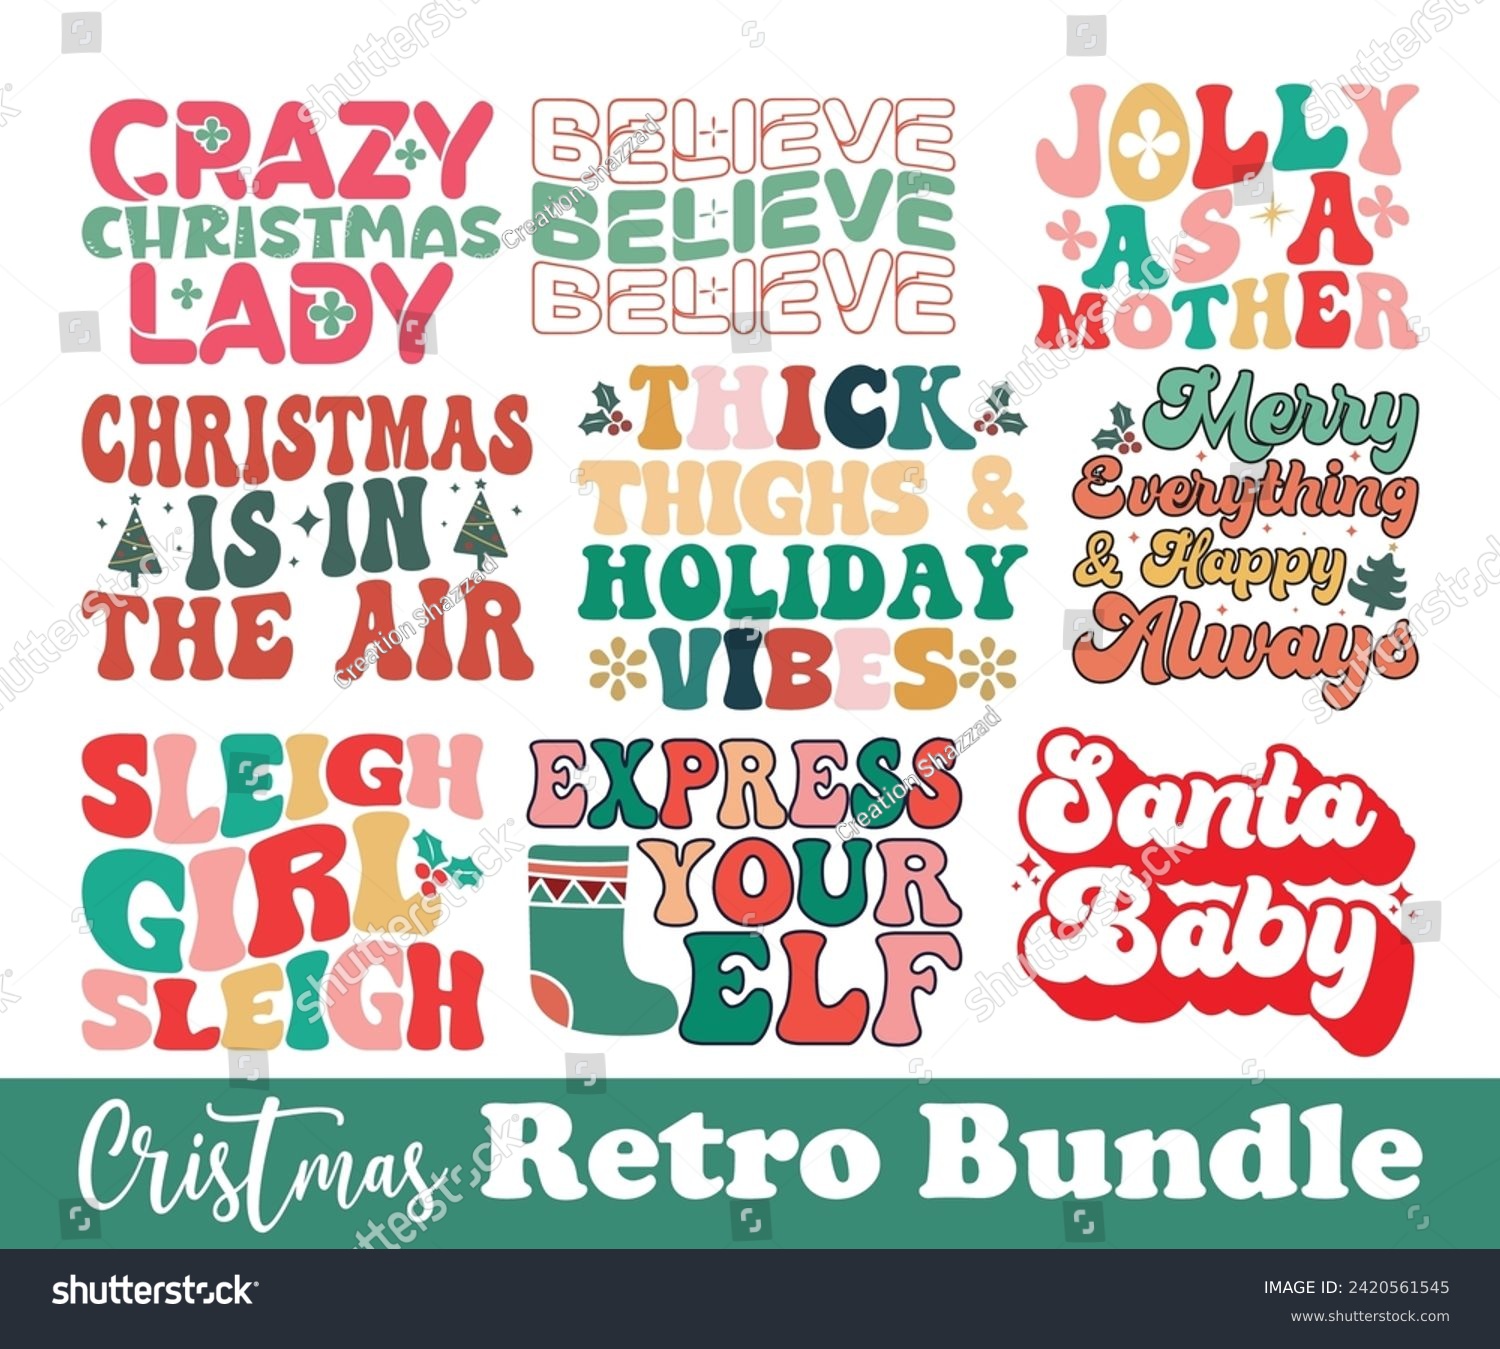 SVG of Christmas Saying, Christmas Retro T-shirt Bundle, Funny Christmas Quotes, Merry Christmas Retro Bundle, Holiday Saying, New Year Quotes, Winter Quotes, Cut File for Cricut svg